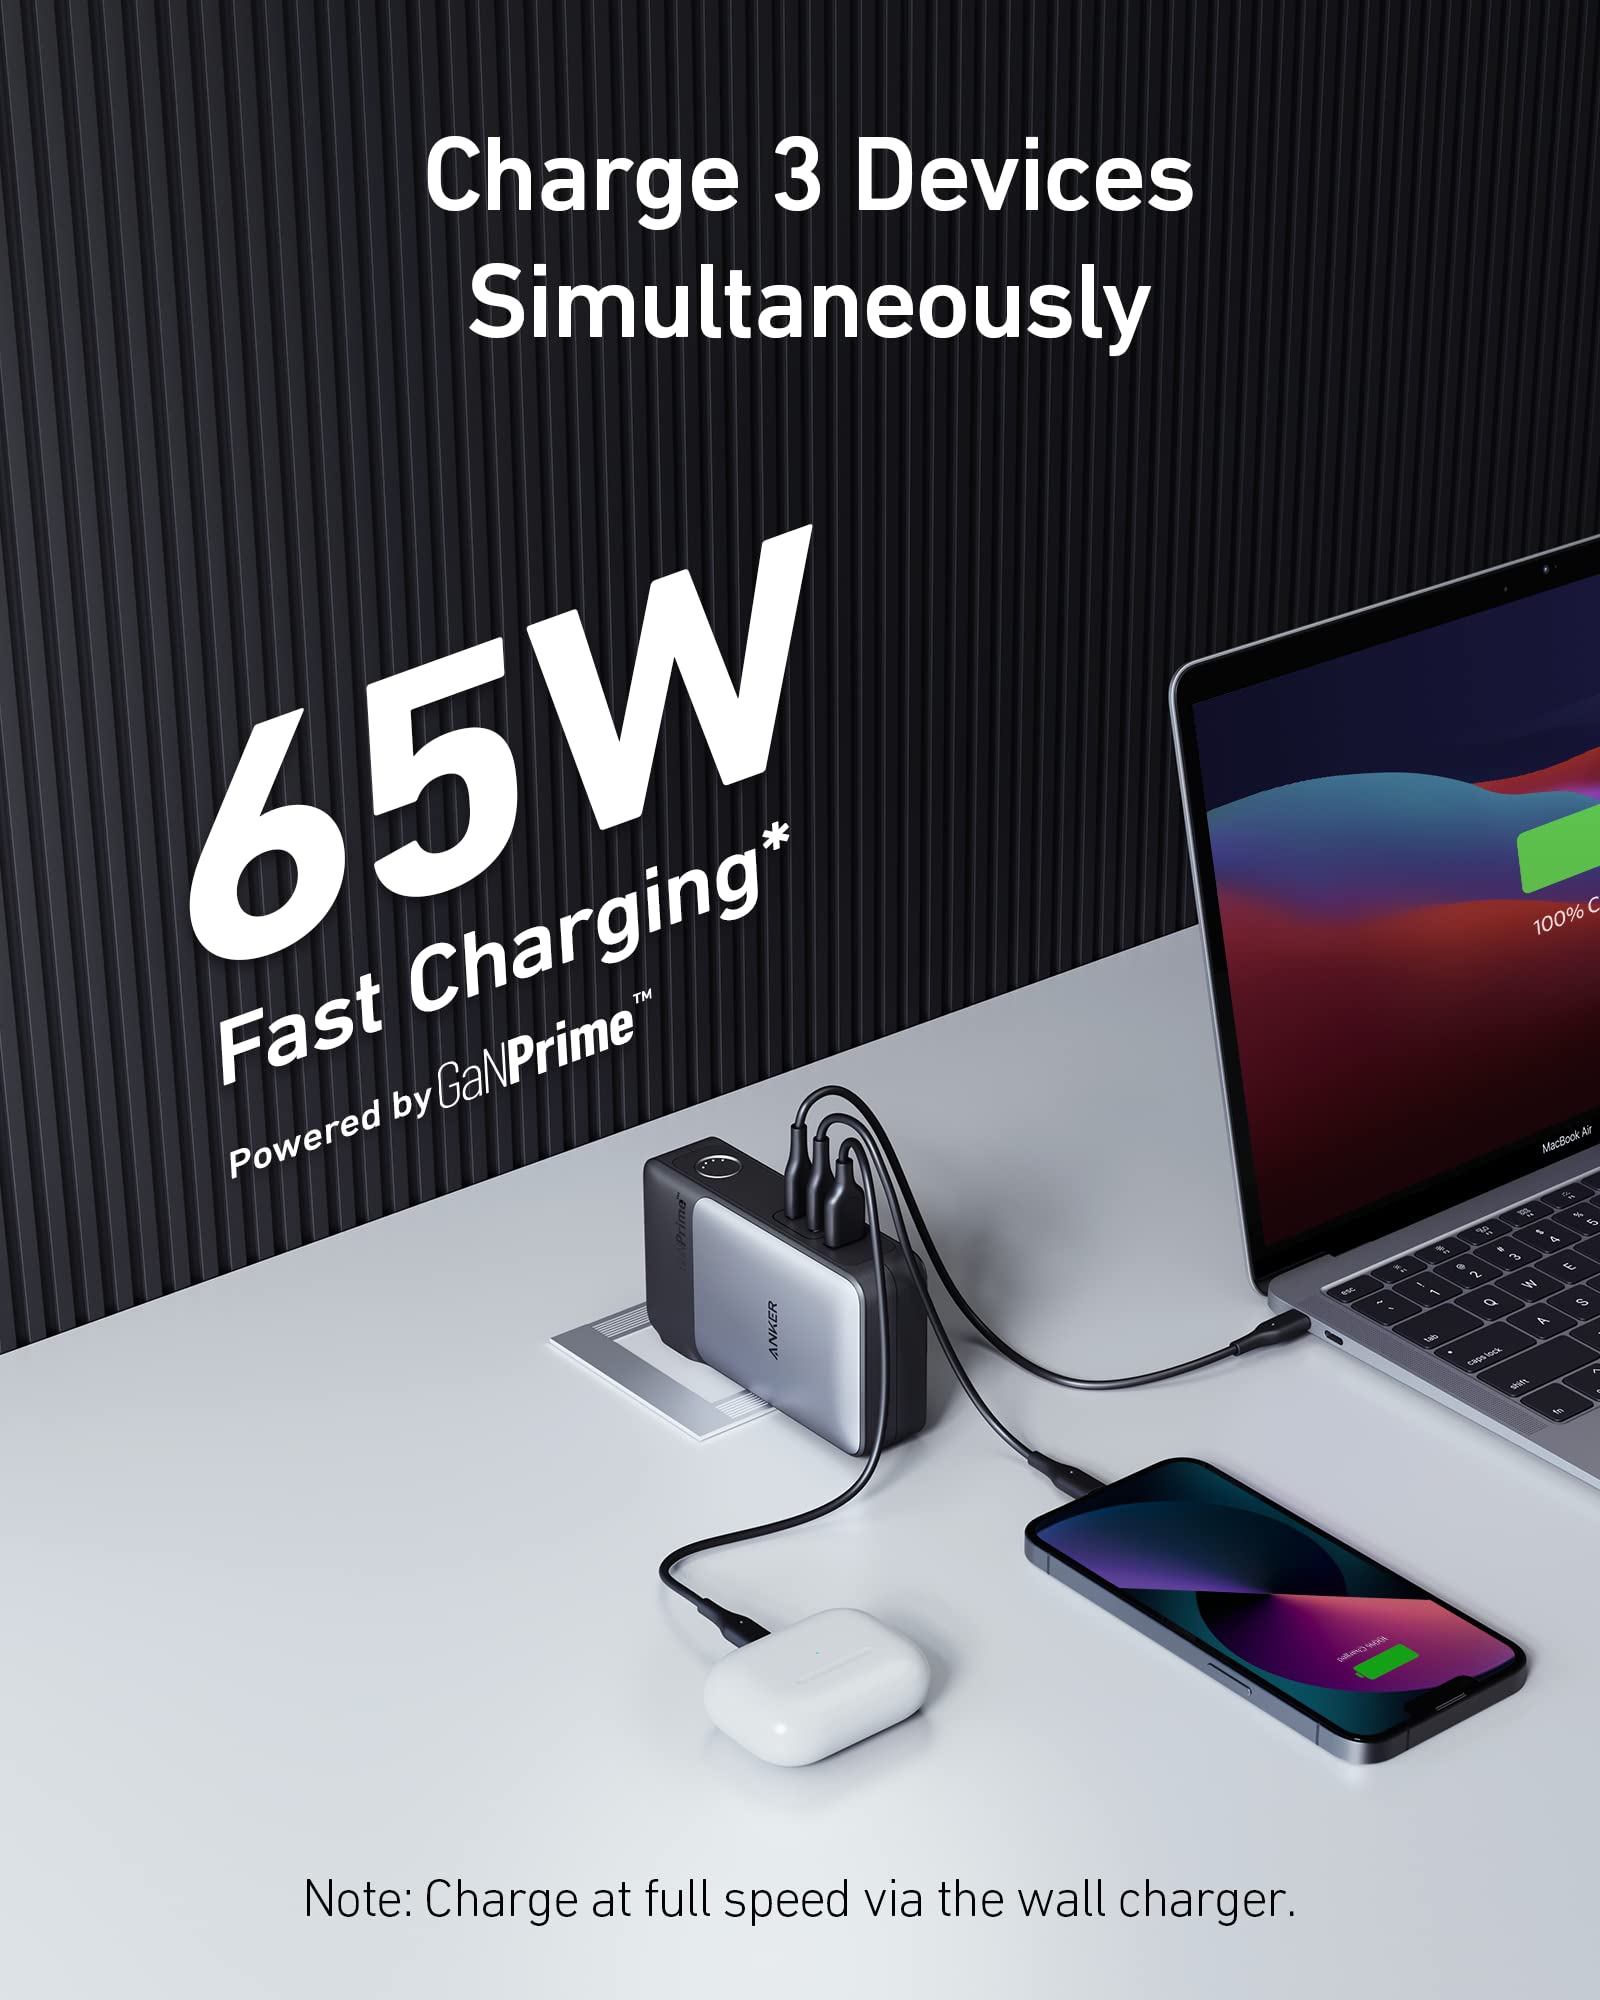 Anker Power Bank (GaNPrime PowerCore 65W), 2-in-1 Hybrid Charger, 10,000mAh 30W USB-C Portable Charger with 65W Wall Charger, Works for iPhone 14/13, Samsung, Pixel, MacBook, Dell, and More